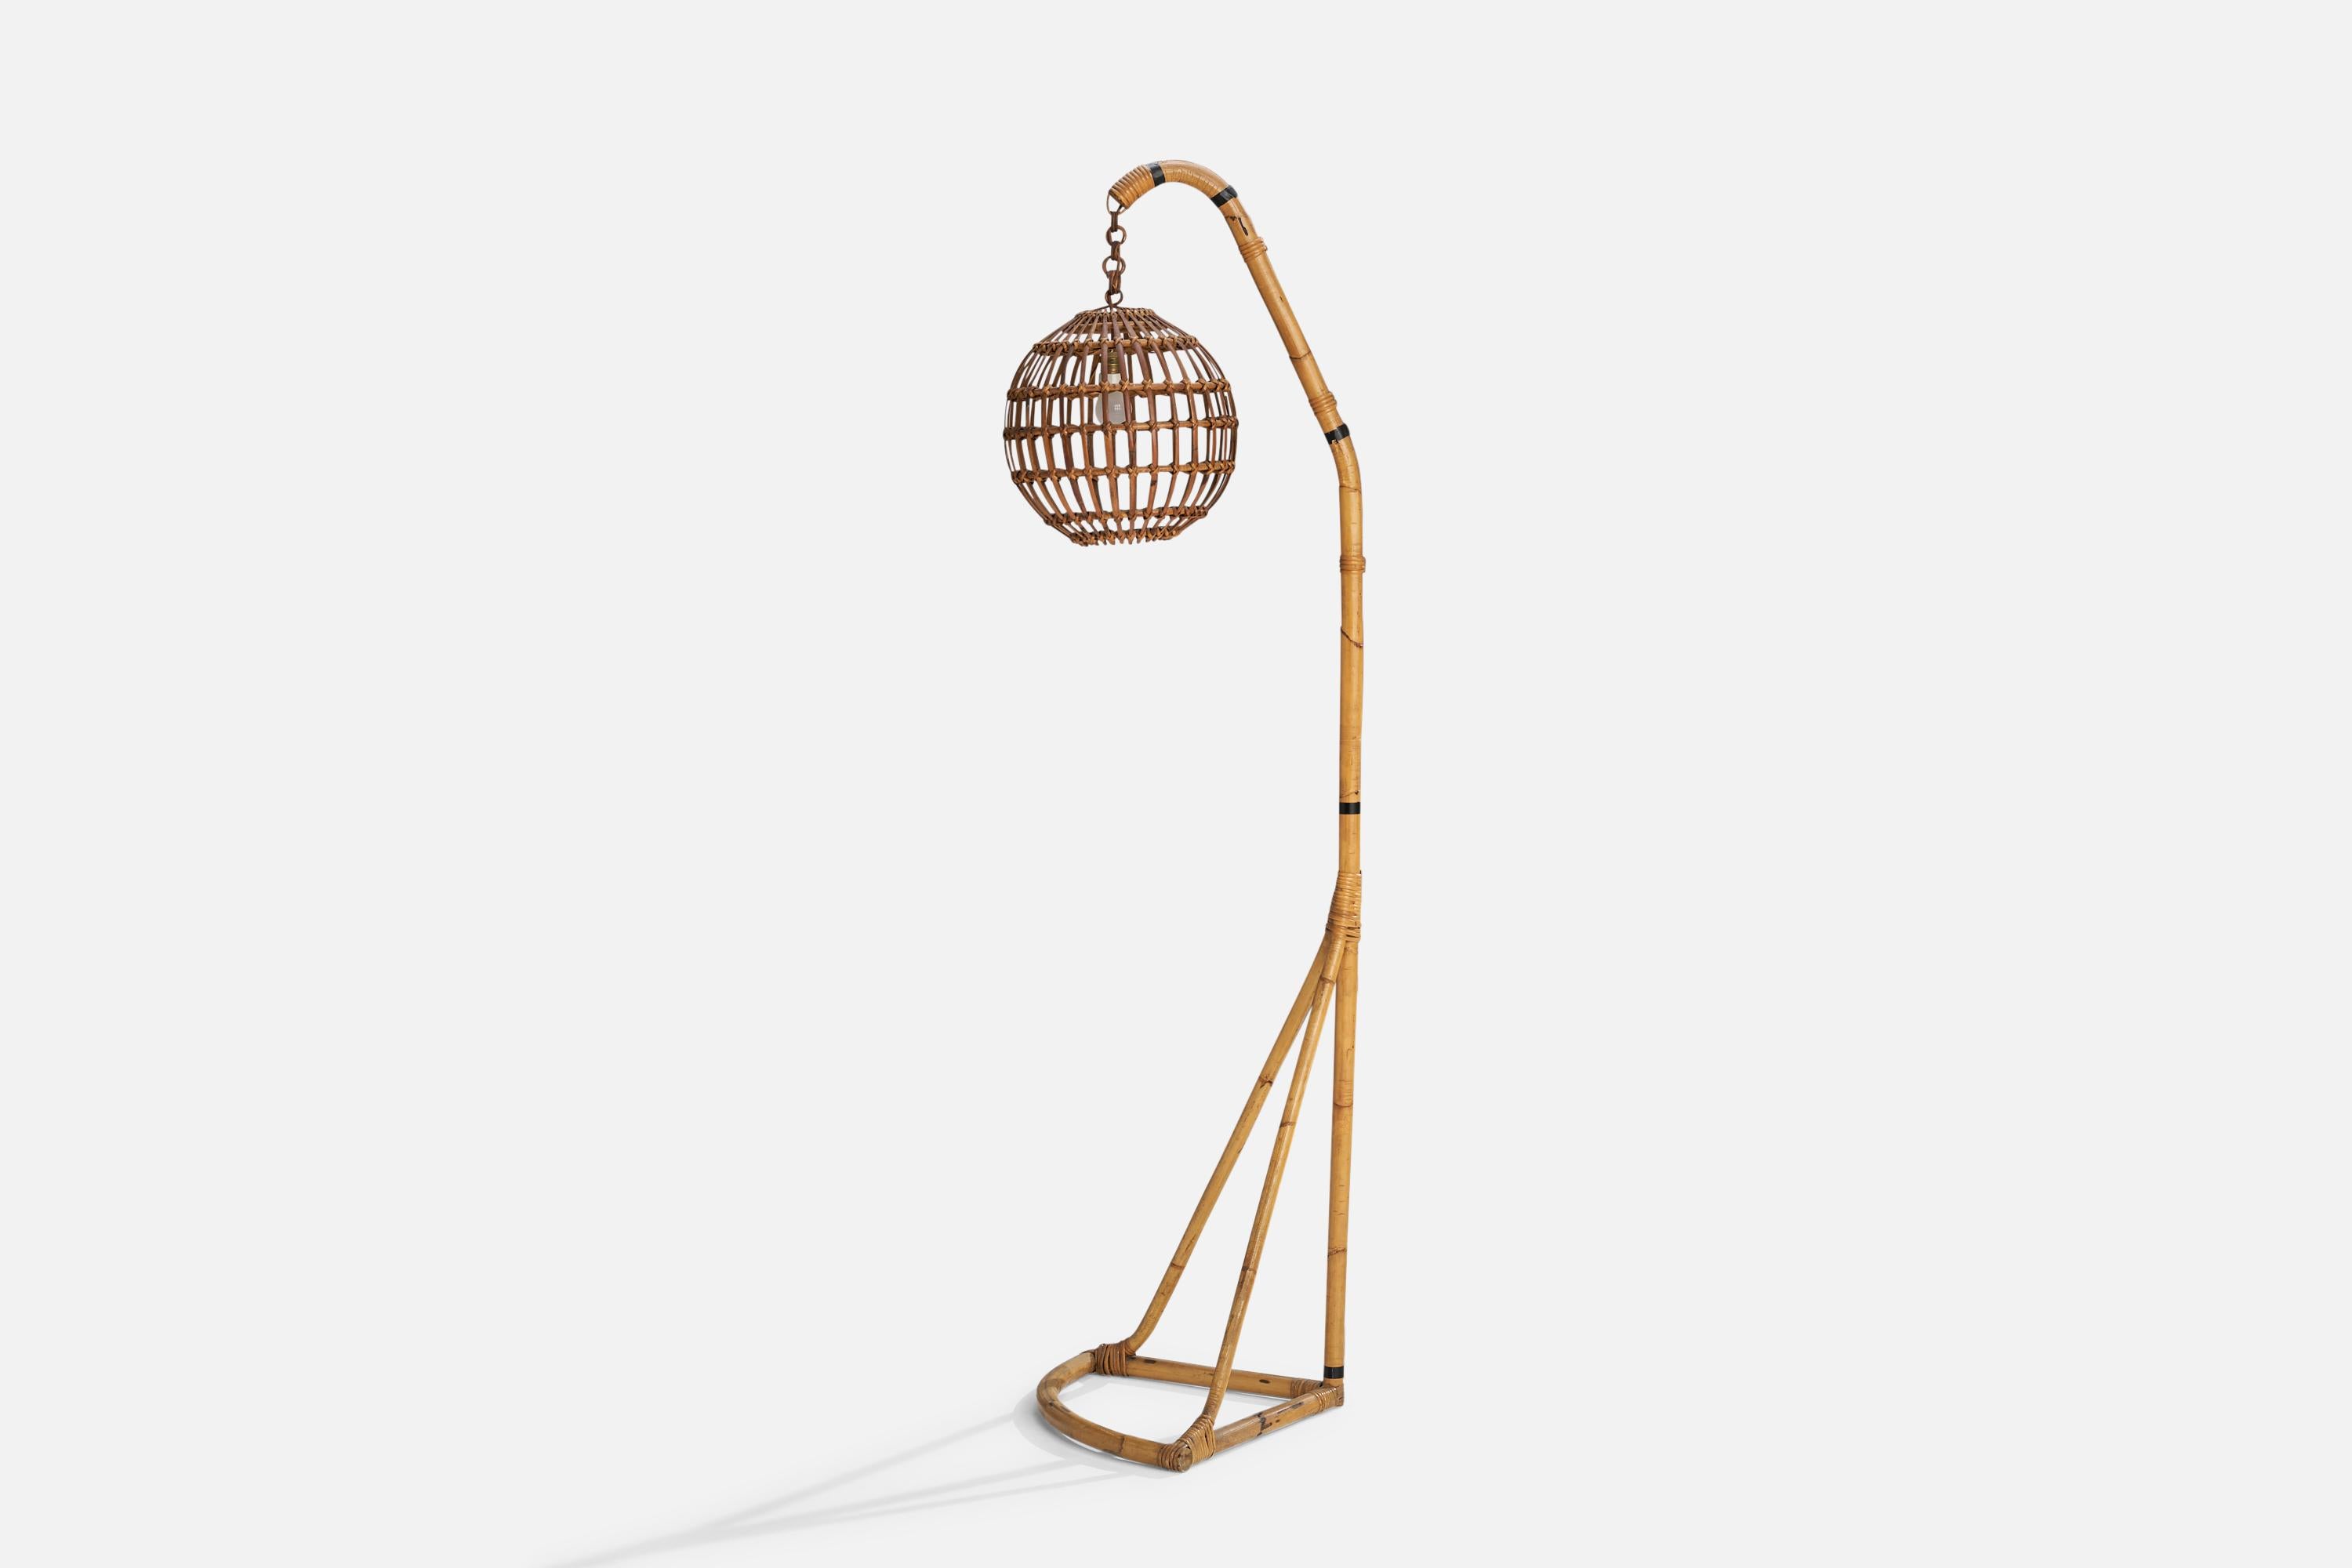 A sizeable bamboo and rattan floor lamp designed and produced in Italy, 1960s.

Overall Dimensions (inches): 79.53”  H x 16.75”  W x 22.45” D
Stated dimensions include shade.
Bulb Specifications: E-26 Bulb
Number of Sockets: 1
All lighting will be